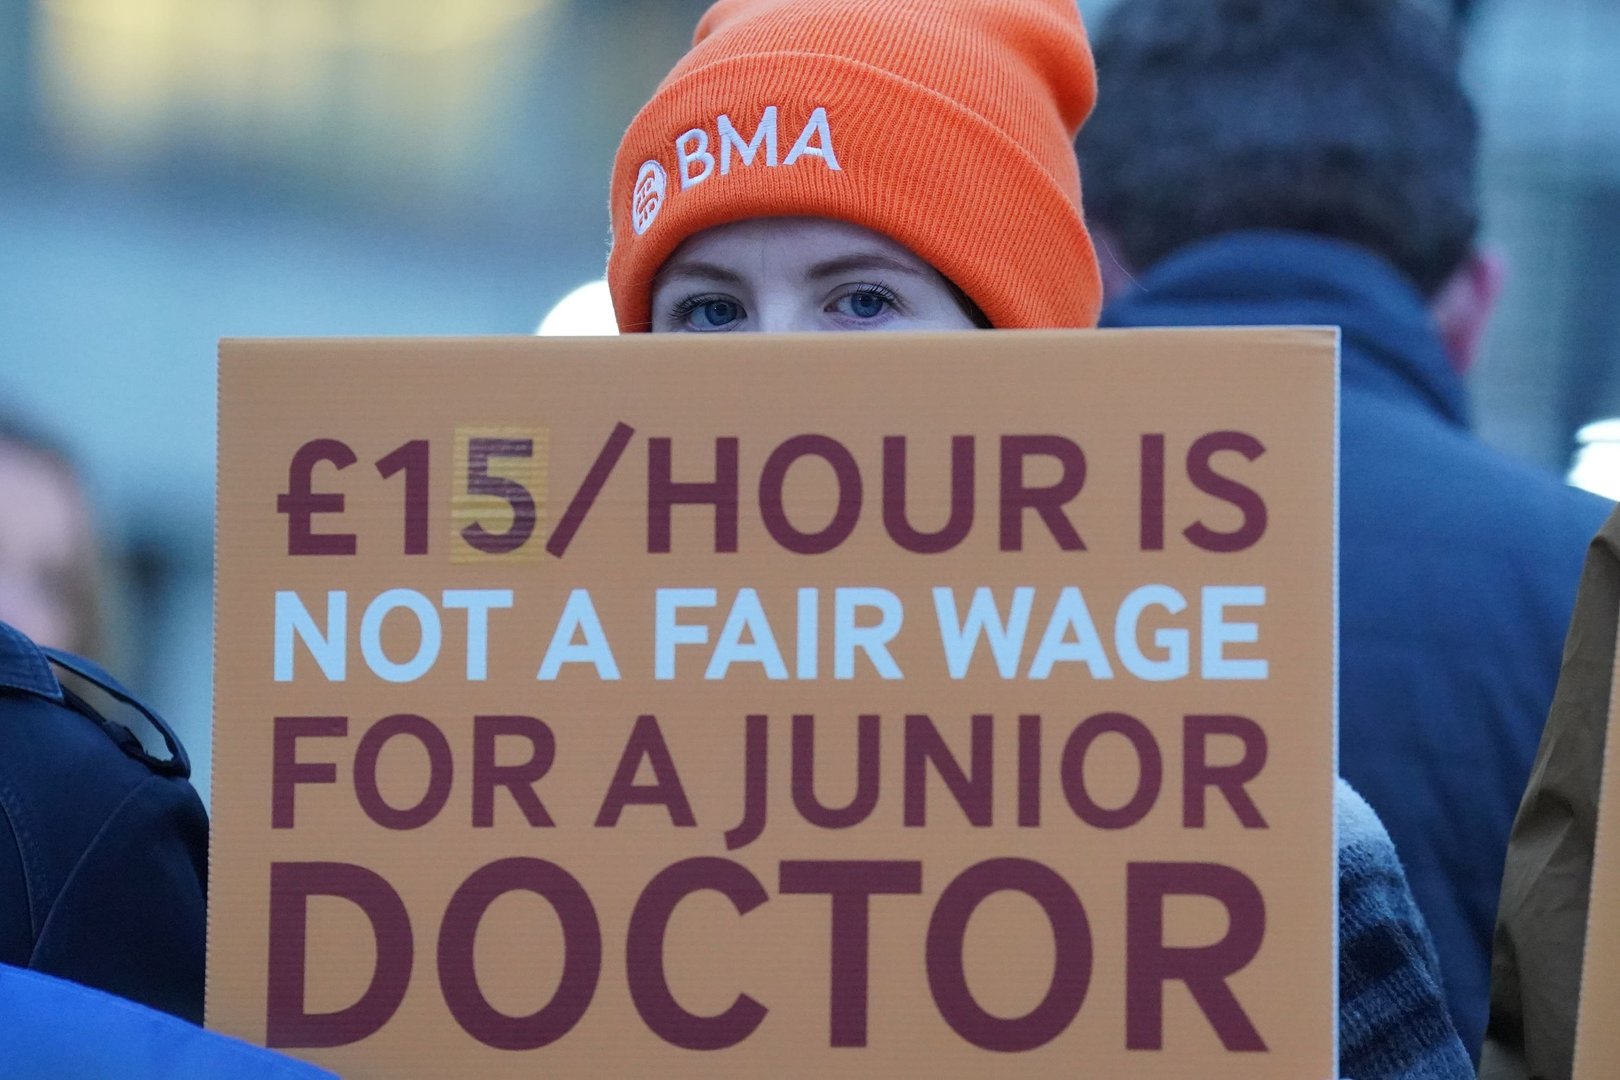 English Junior Doctors to Strike for Five Days, According to BMA